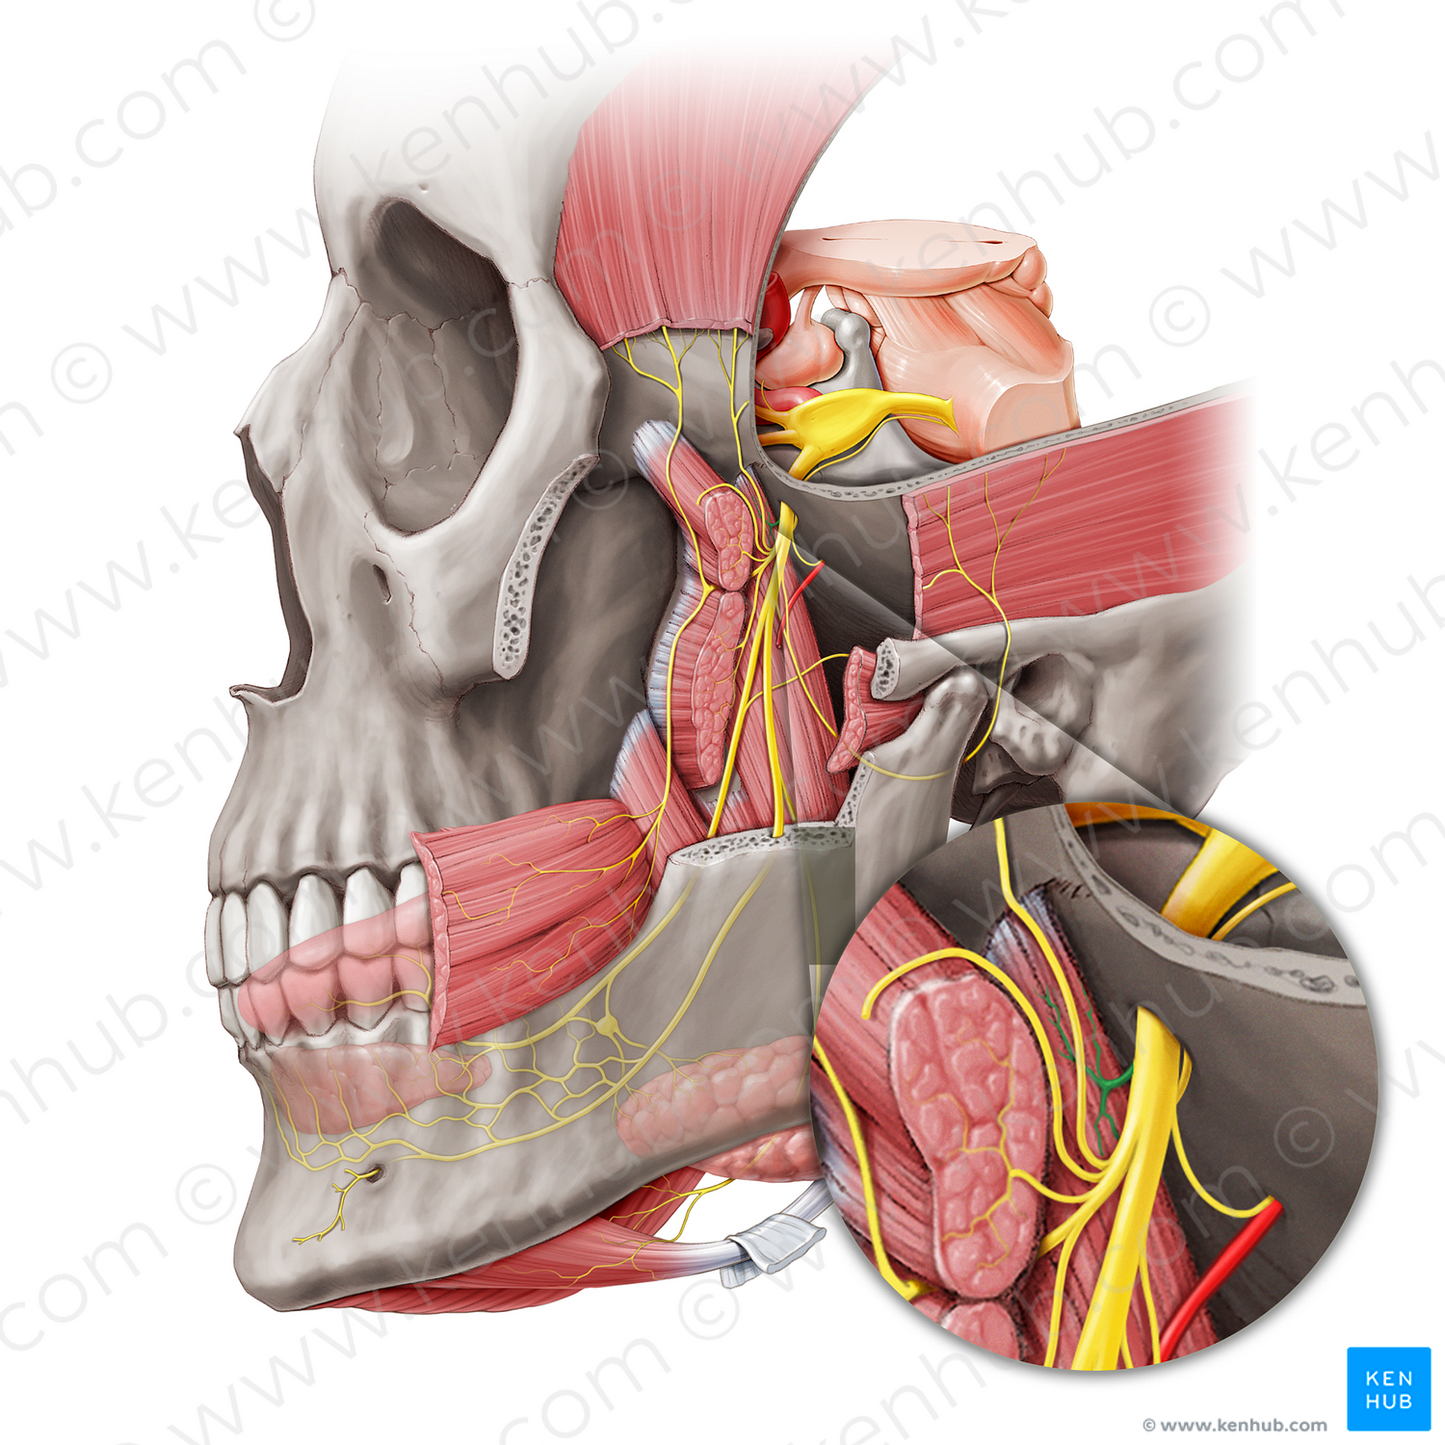 Nerve to medial pterygoid muscle (#20457)